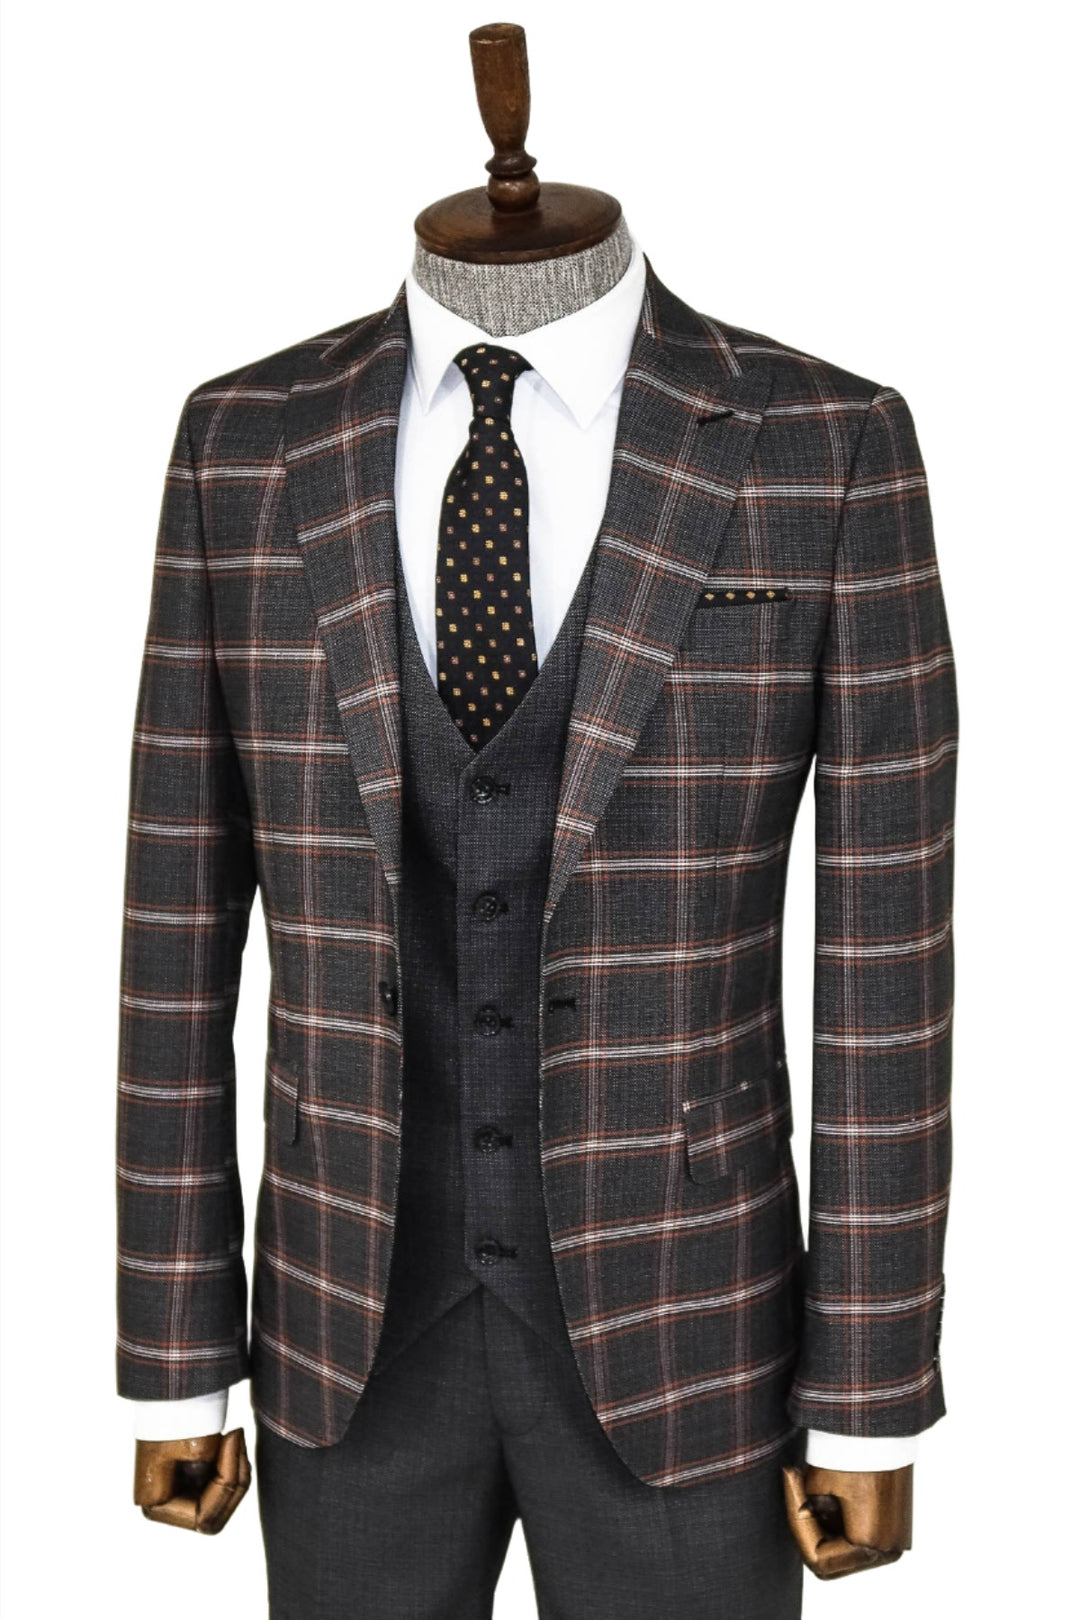 Checked Patterned Black Slim Fit Suit - Wessi